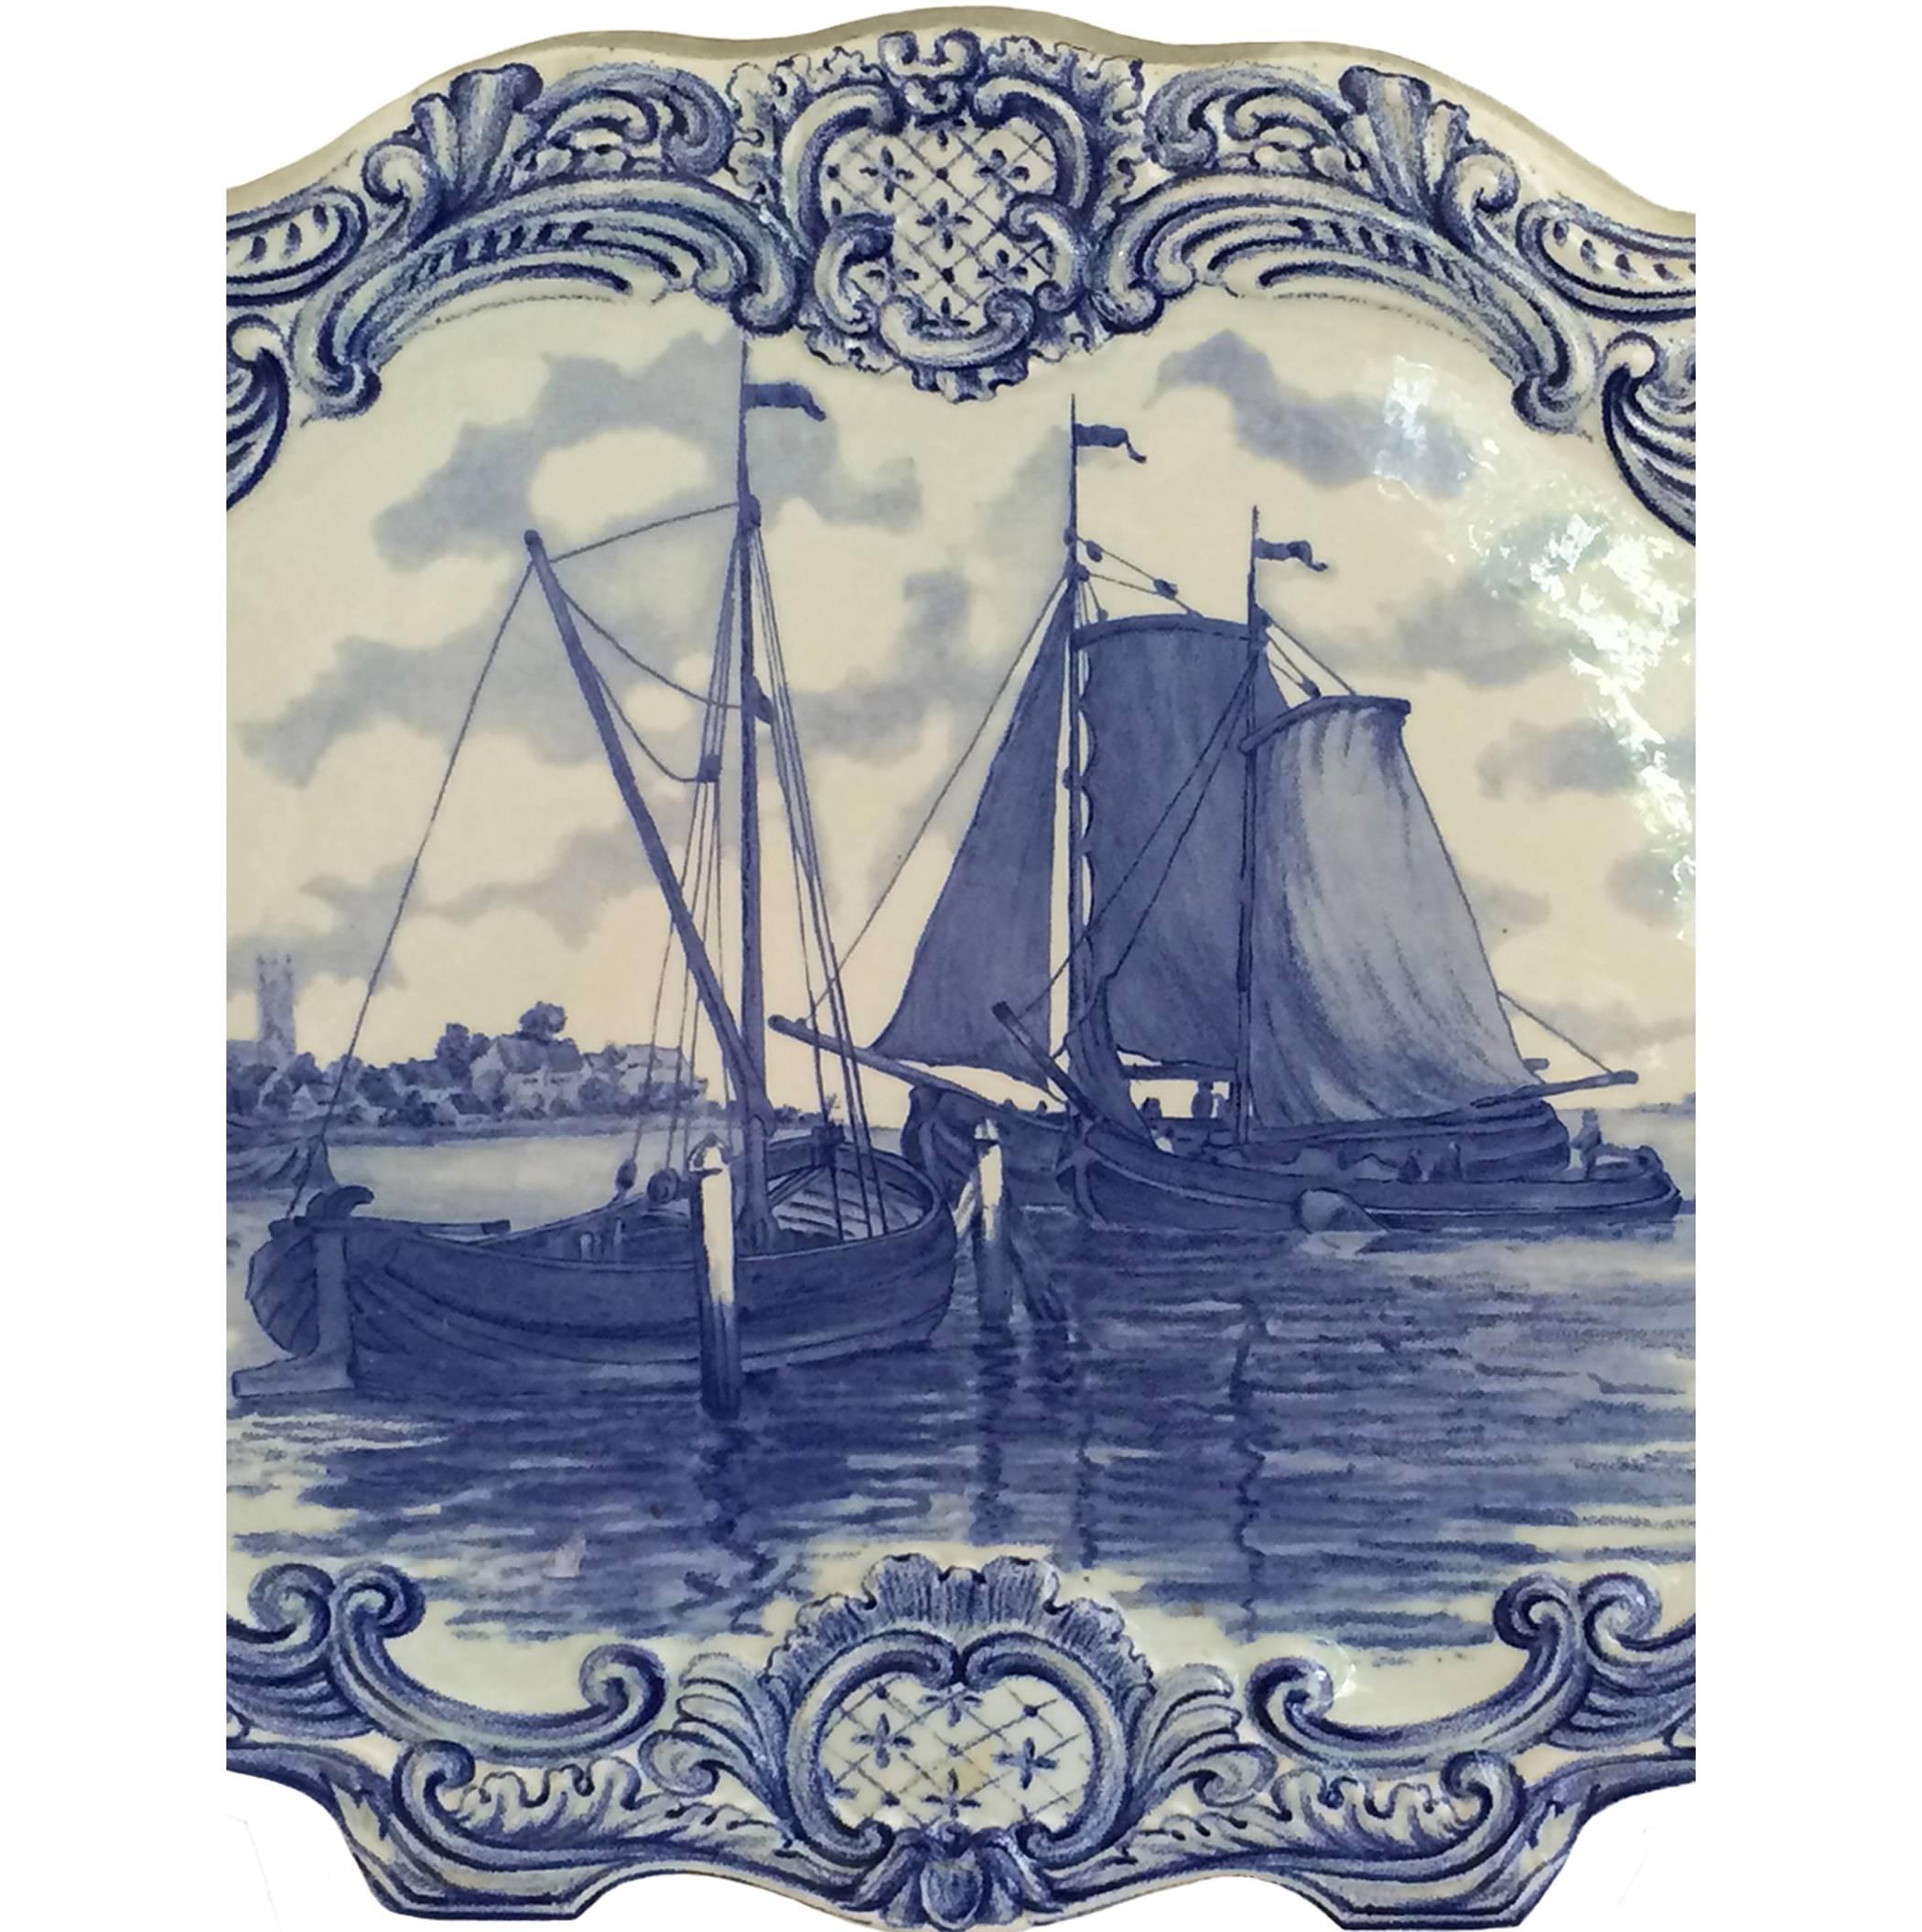 Delft wall plaque with sailing vessels on a serene body of water; undulating raised border; 18th century.